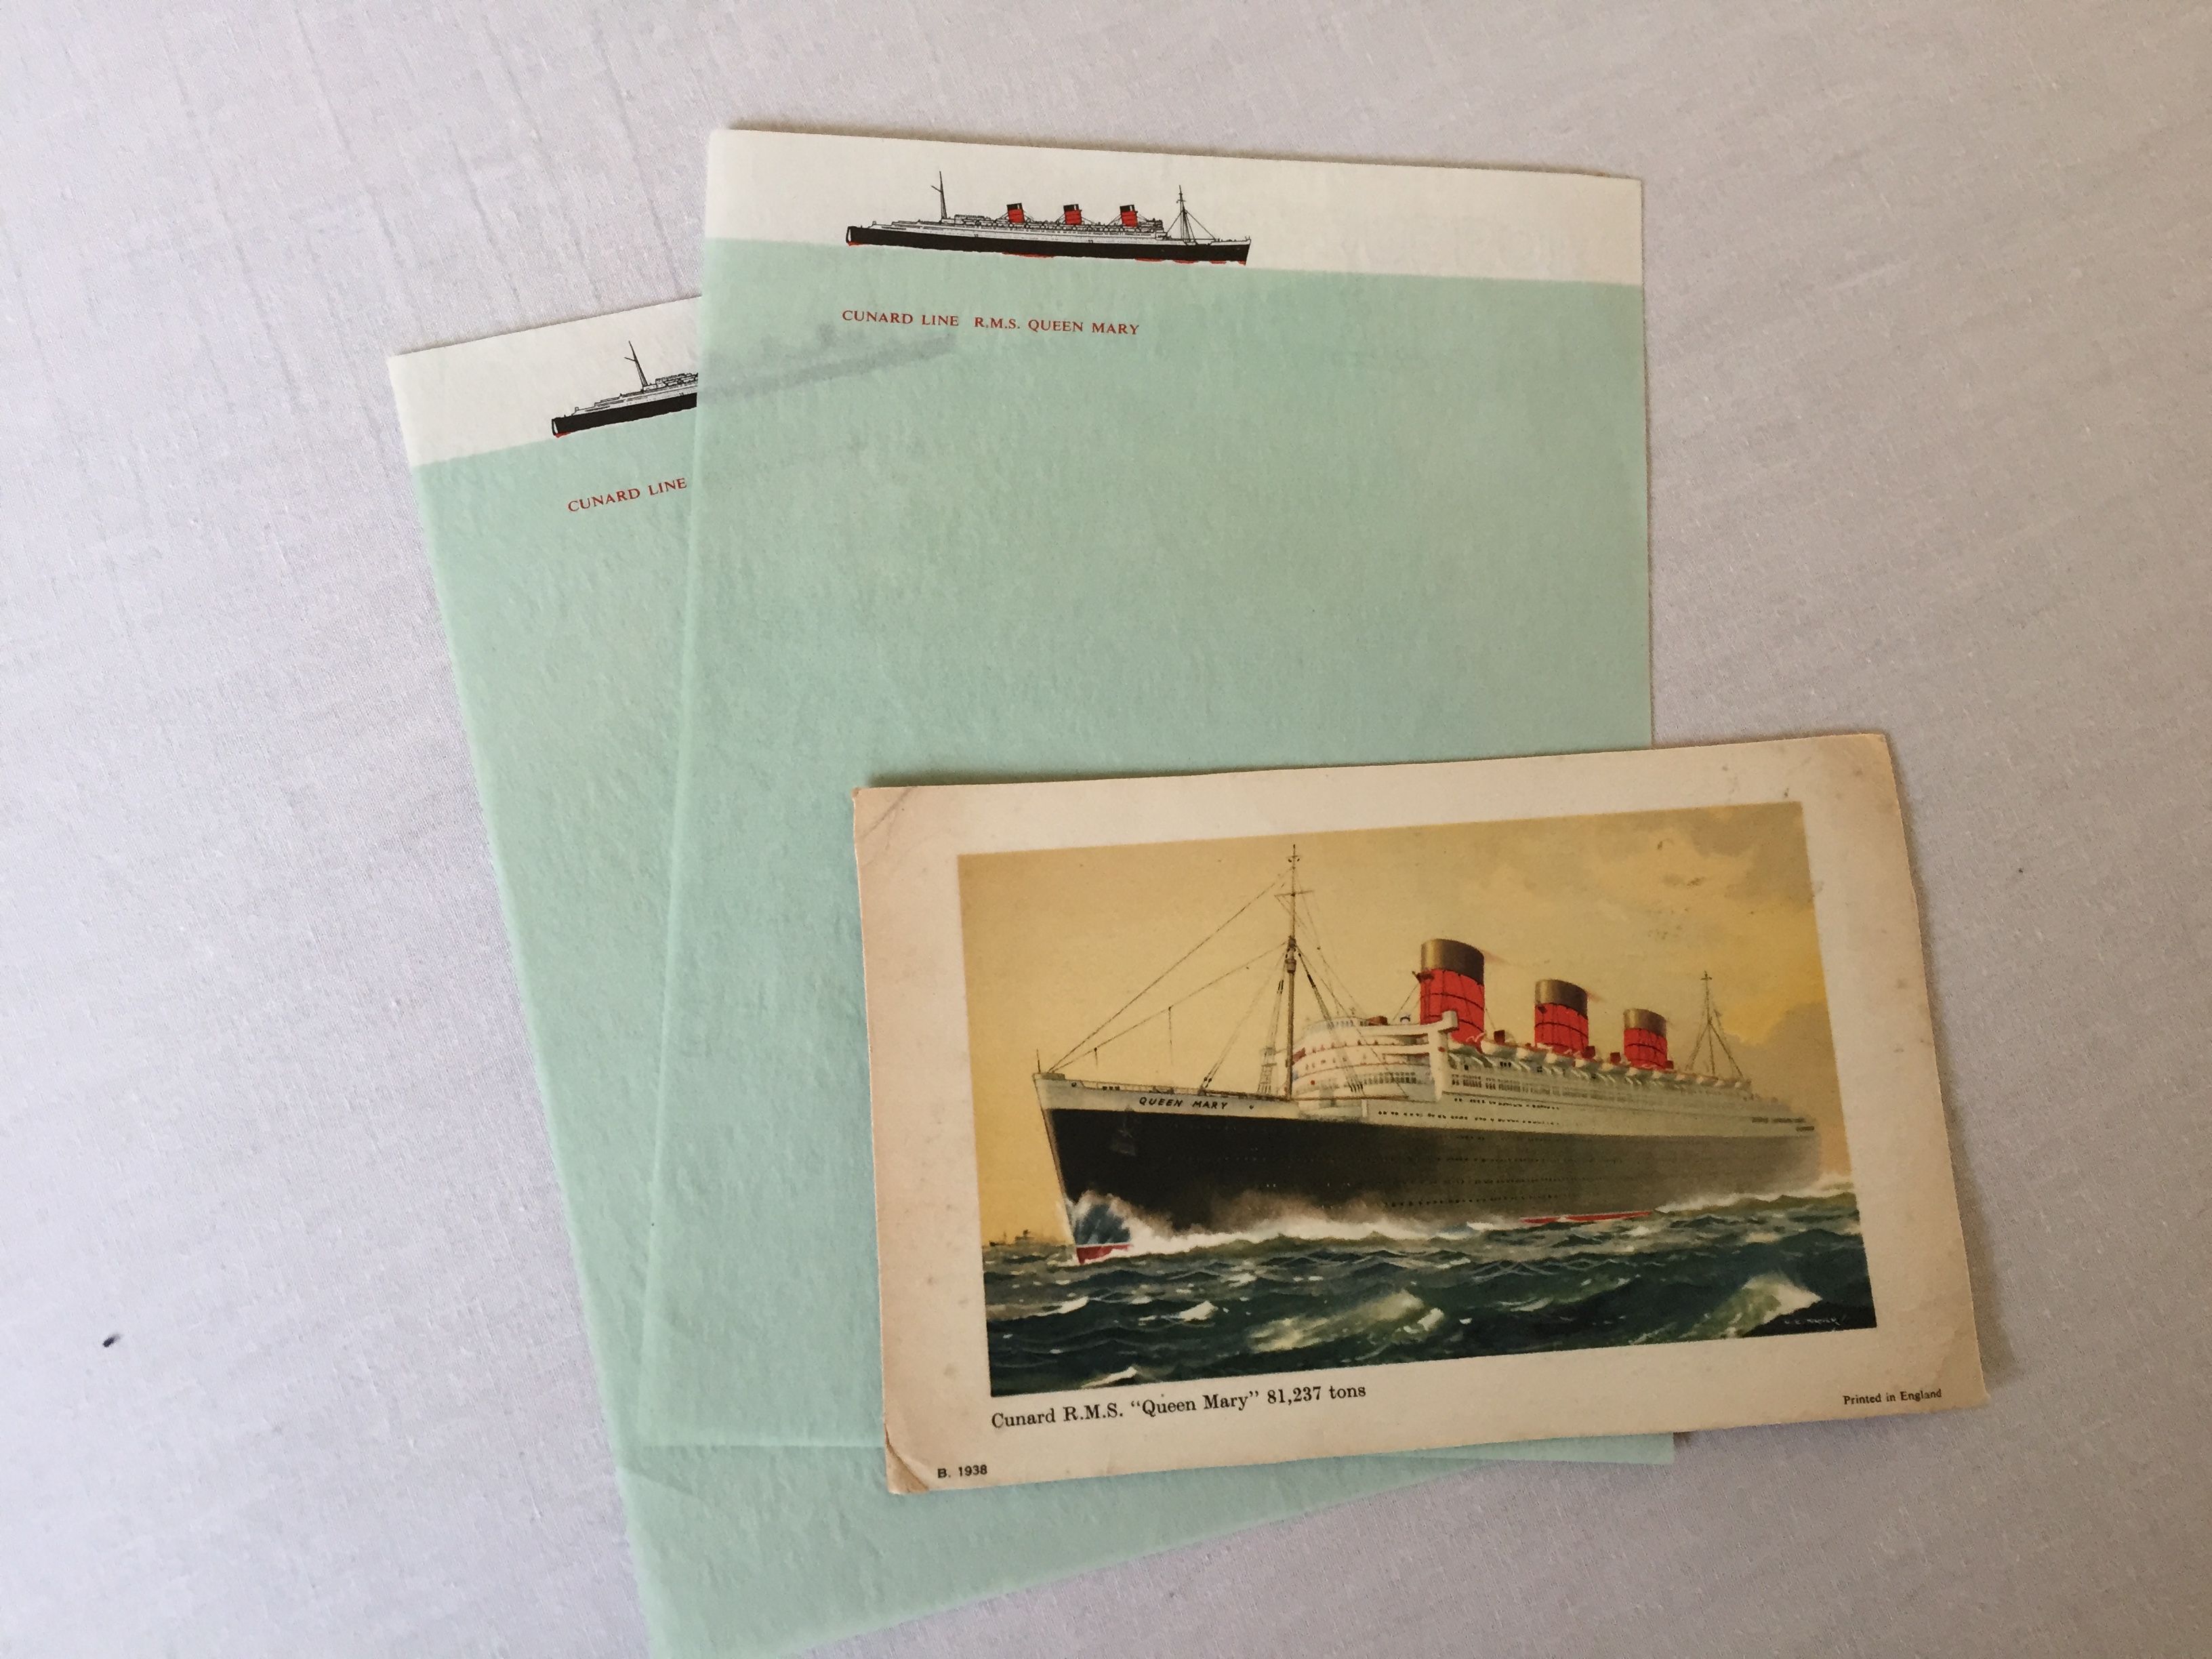 LOG CARD AND UNUSED EARLY CABIN WRITING PAPER FROM THE RMS QUEEN MARY 